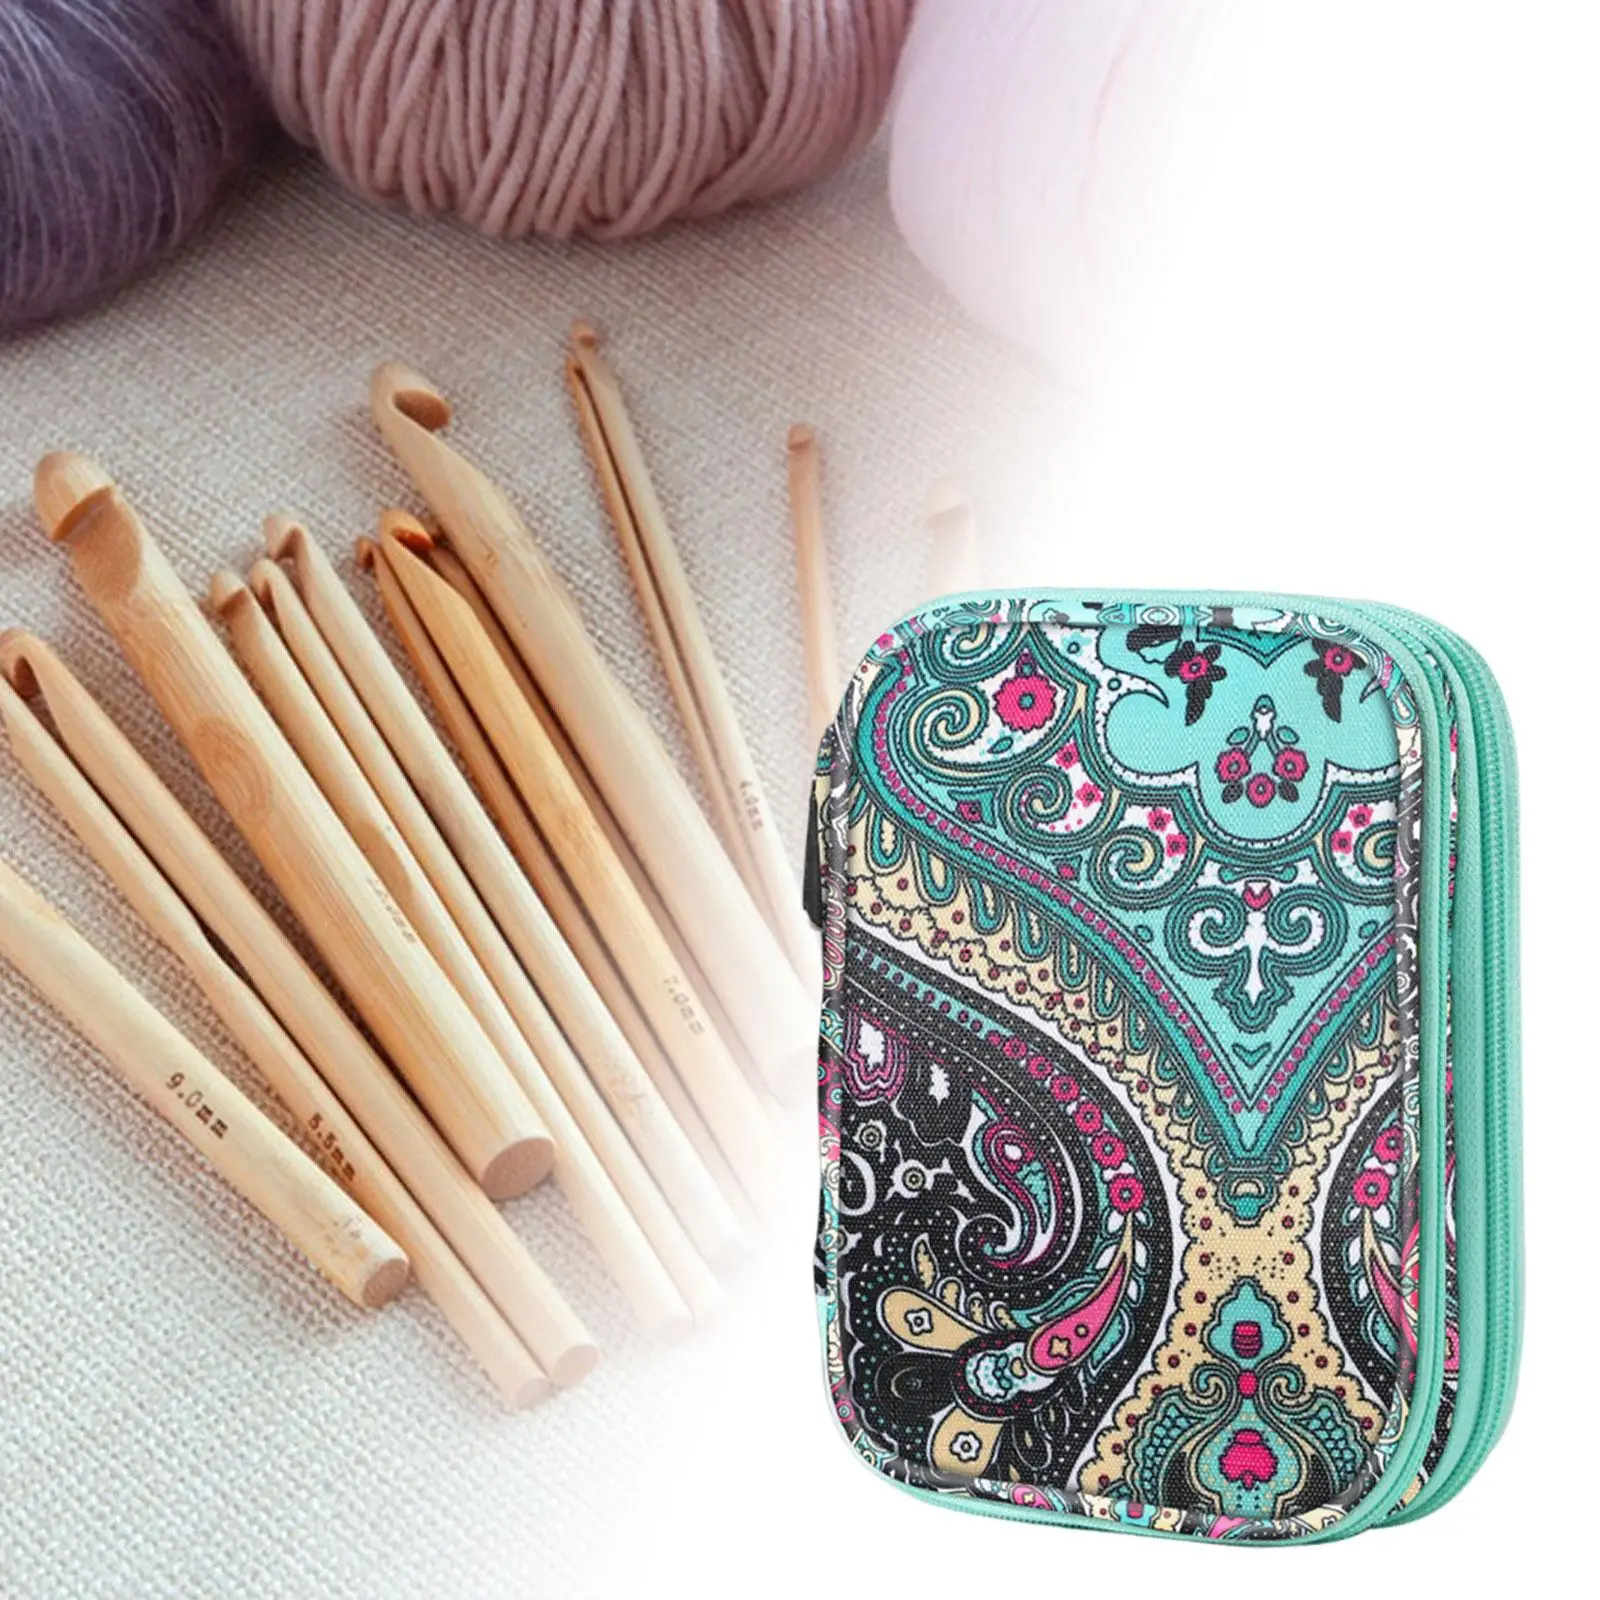 Knitting Needle Storage Bag Knitting Bag Double Layers Length 17.5cm Easy to Carry Oxford with Zipper Crochet Hooks Organizer